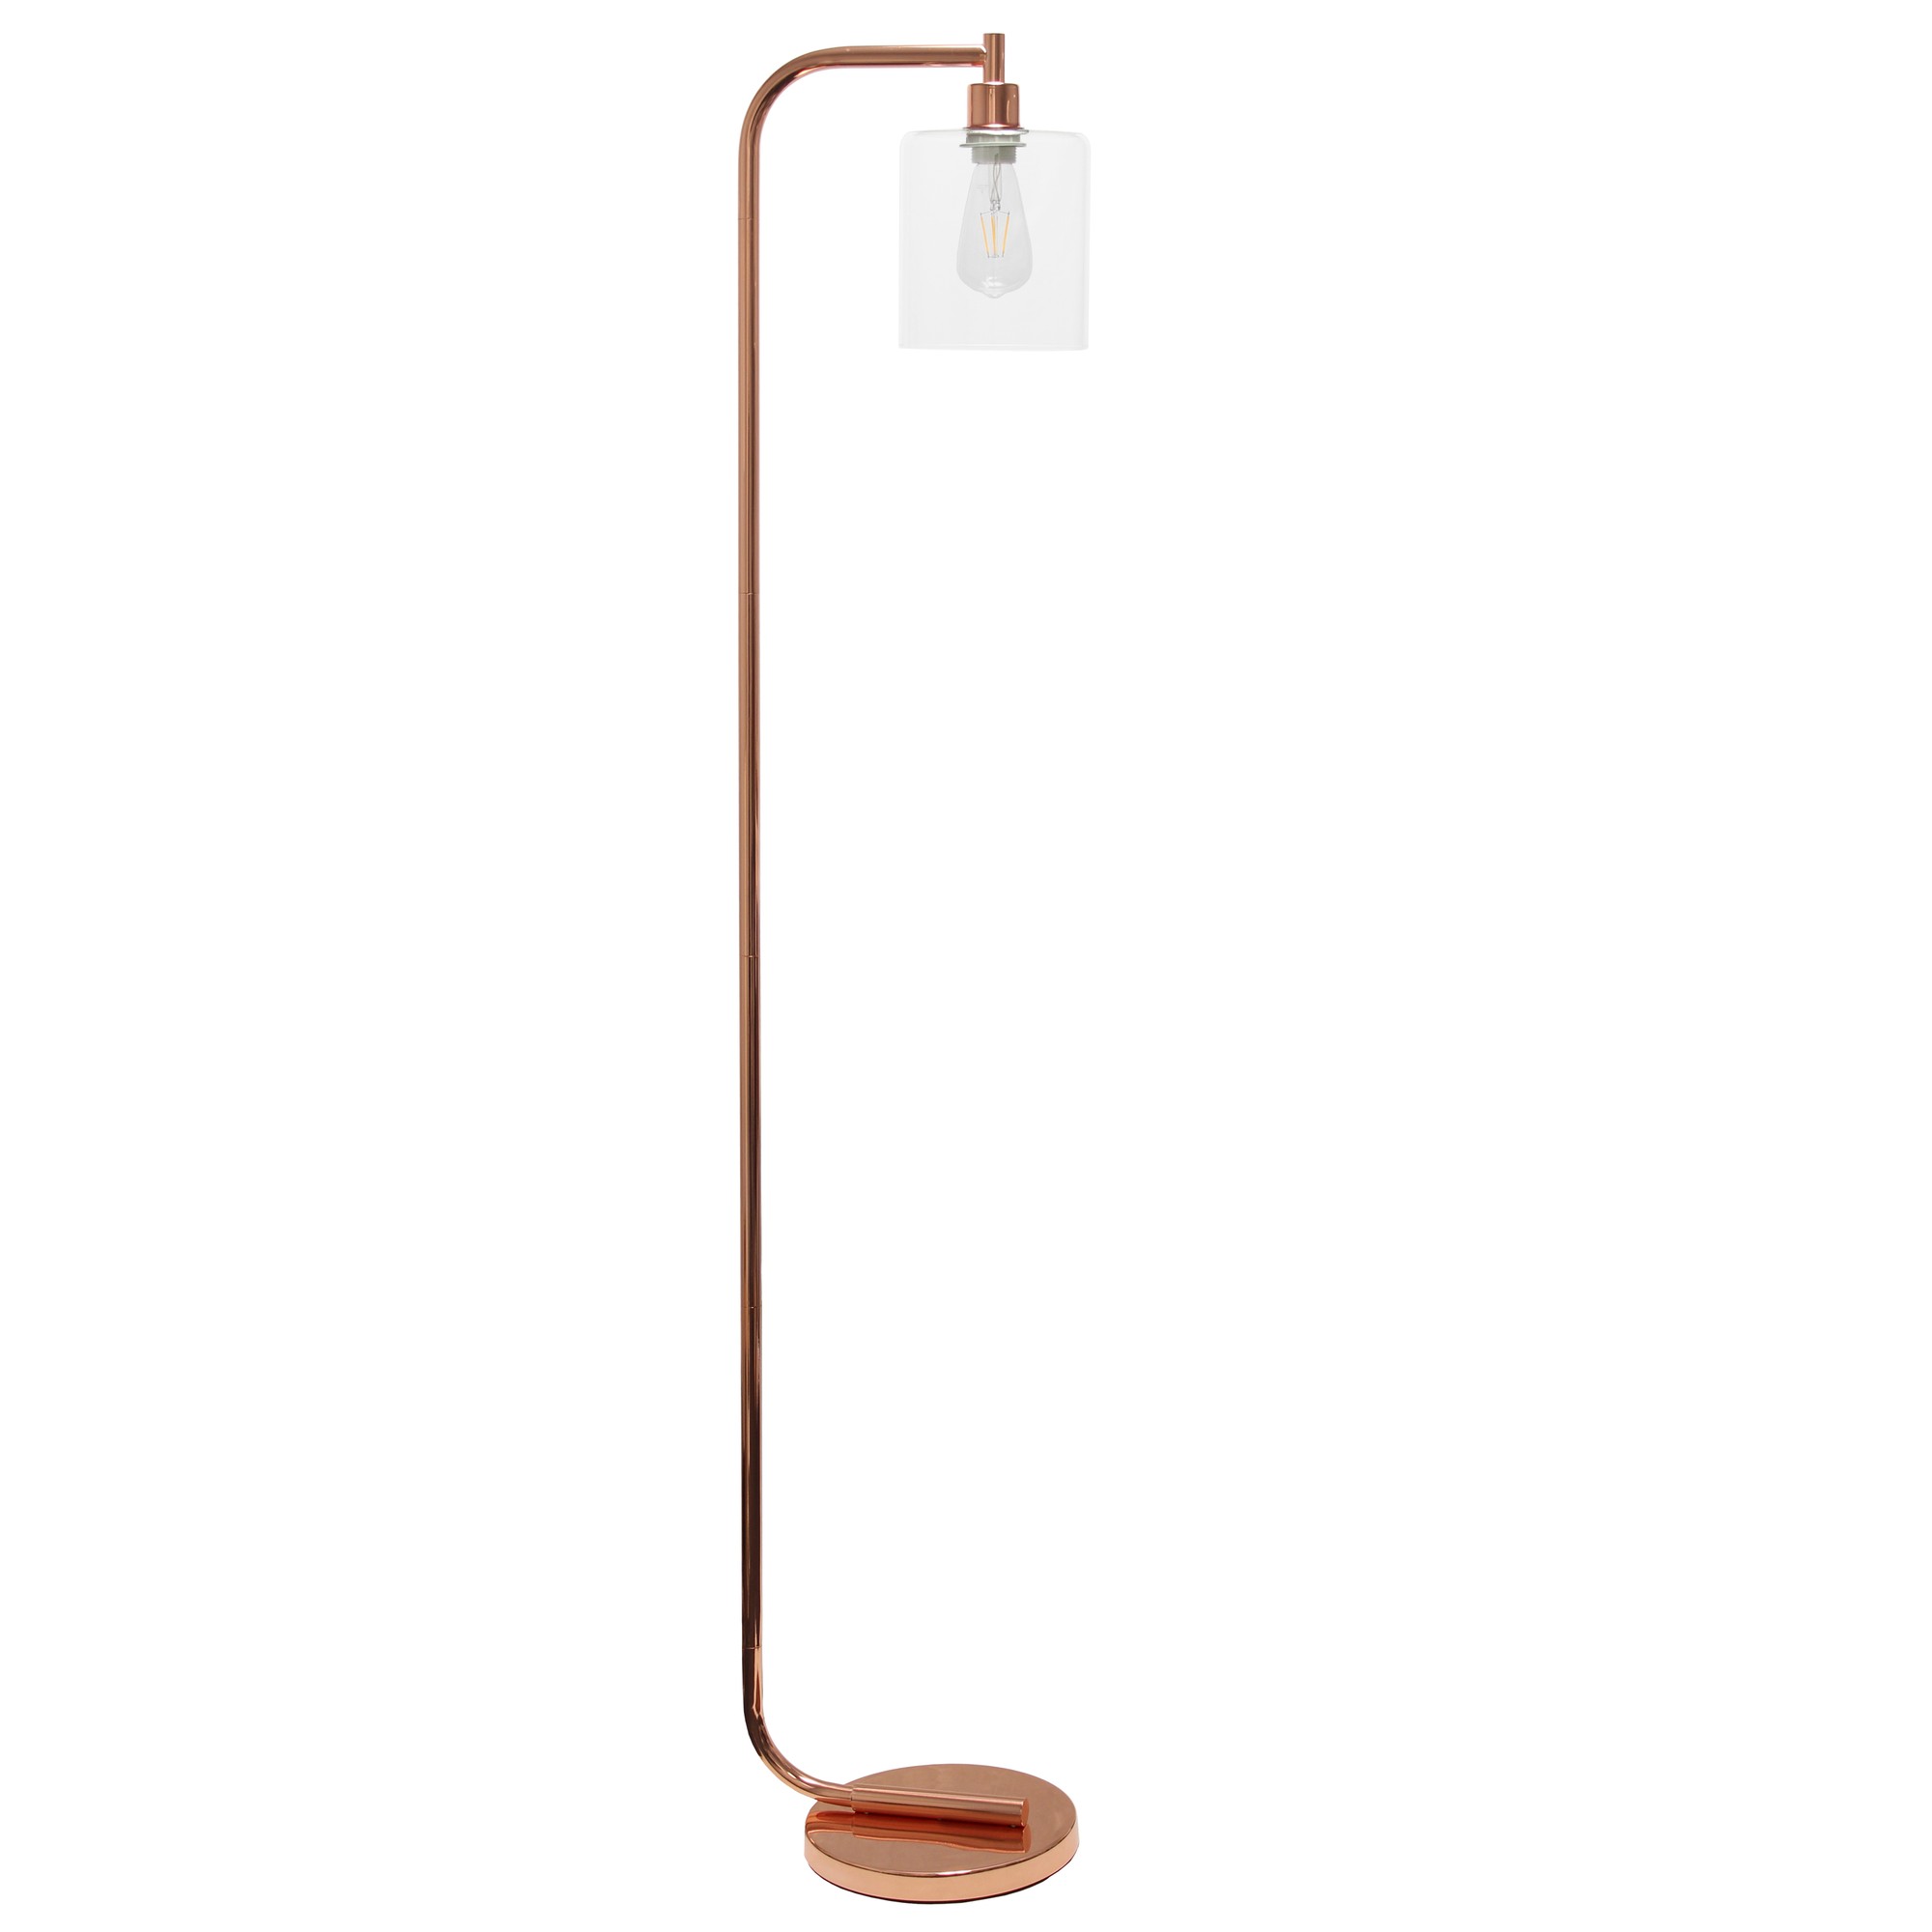 Simple Designs Antique Style Industrial Iron Lantern Floor Lamp with Glass Shade, Rose Gold